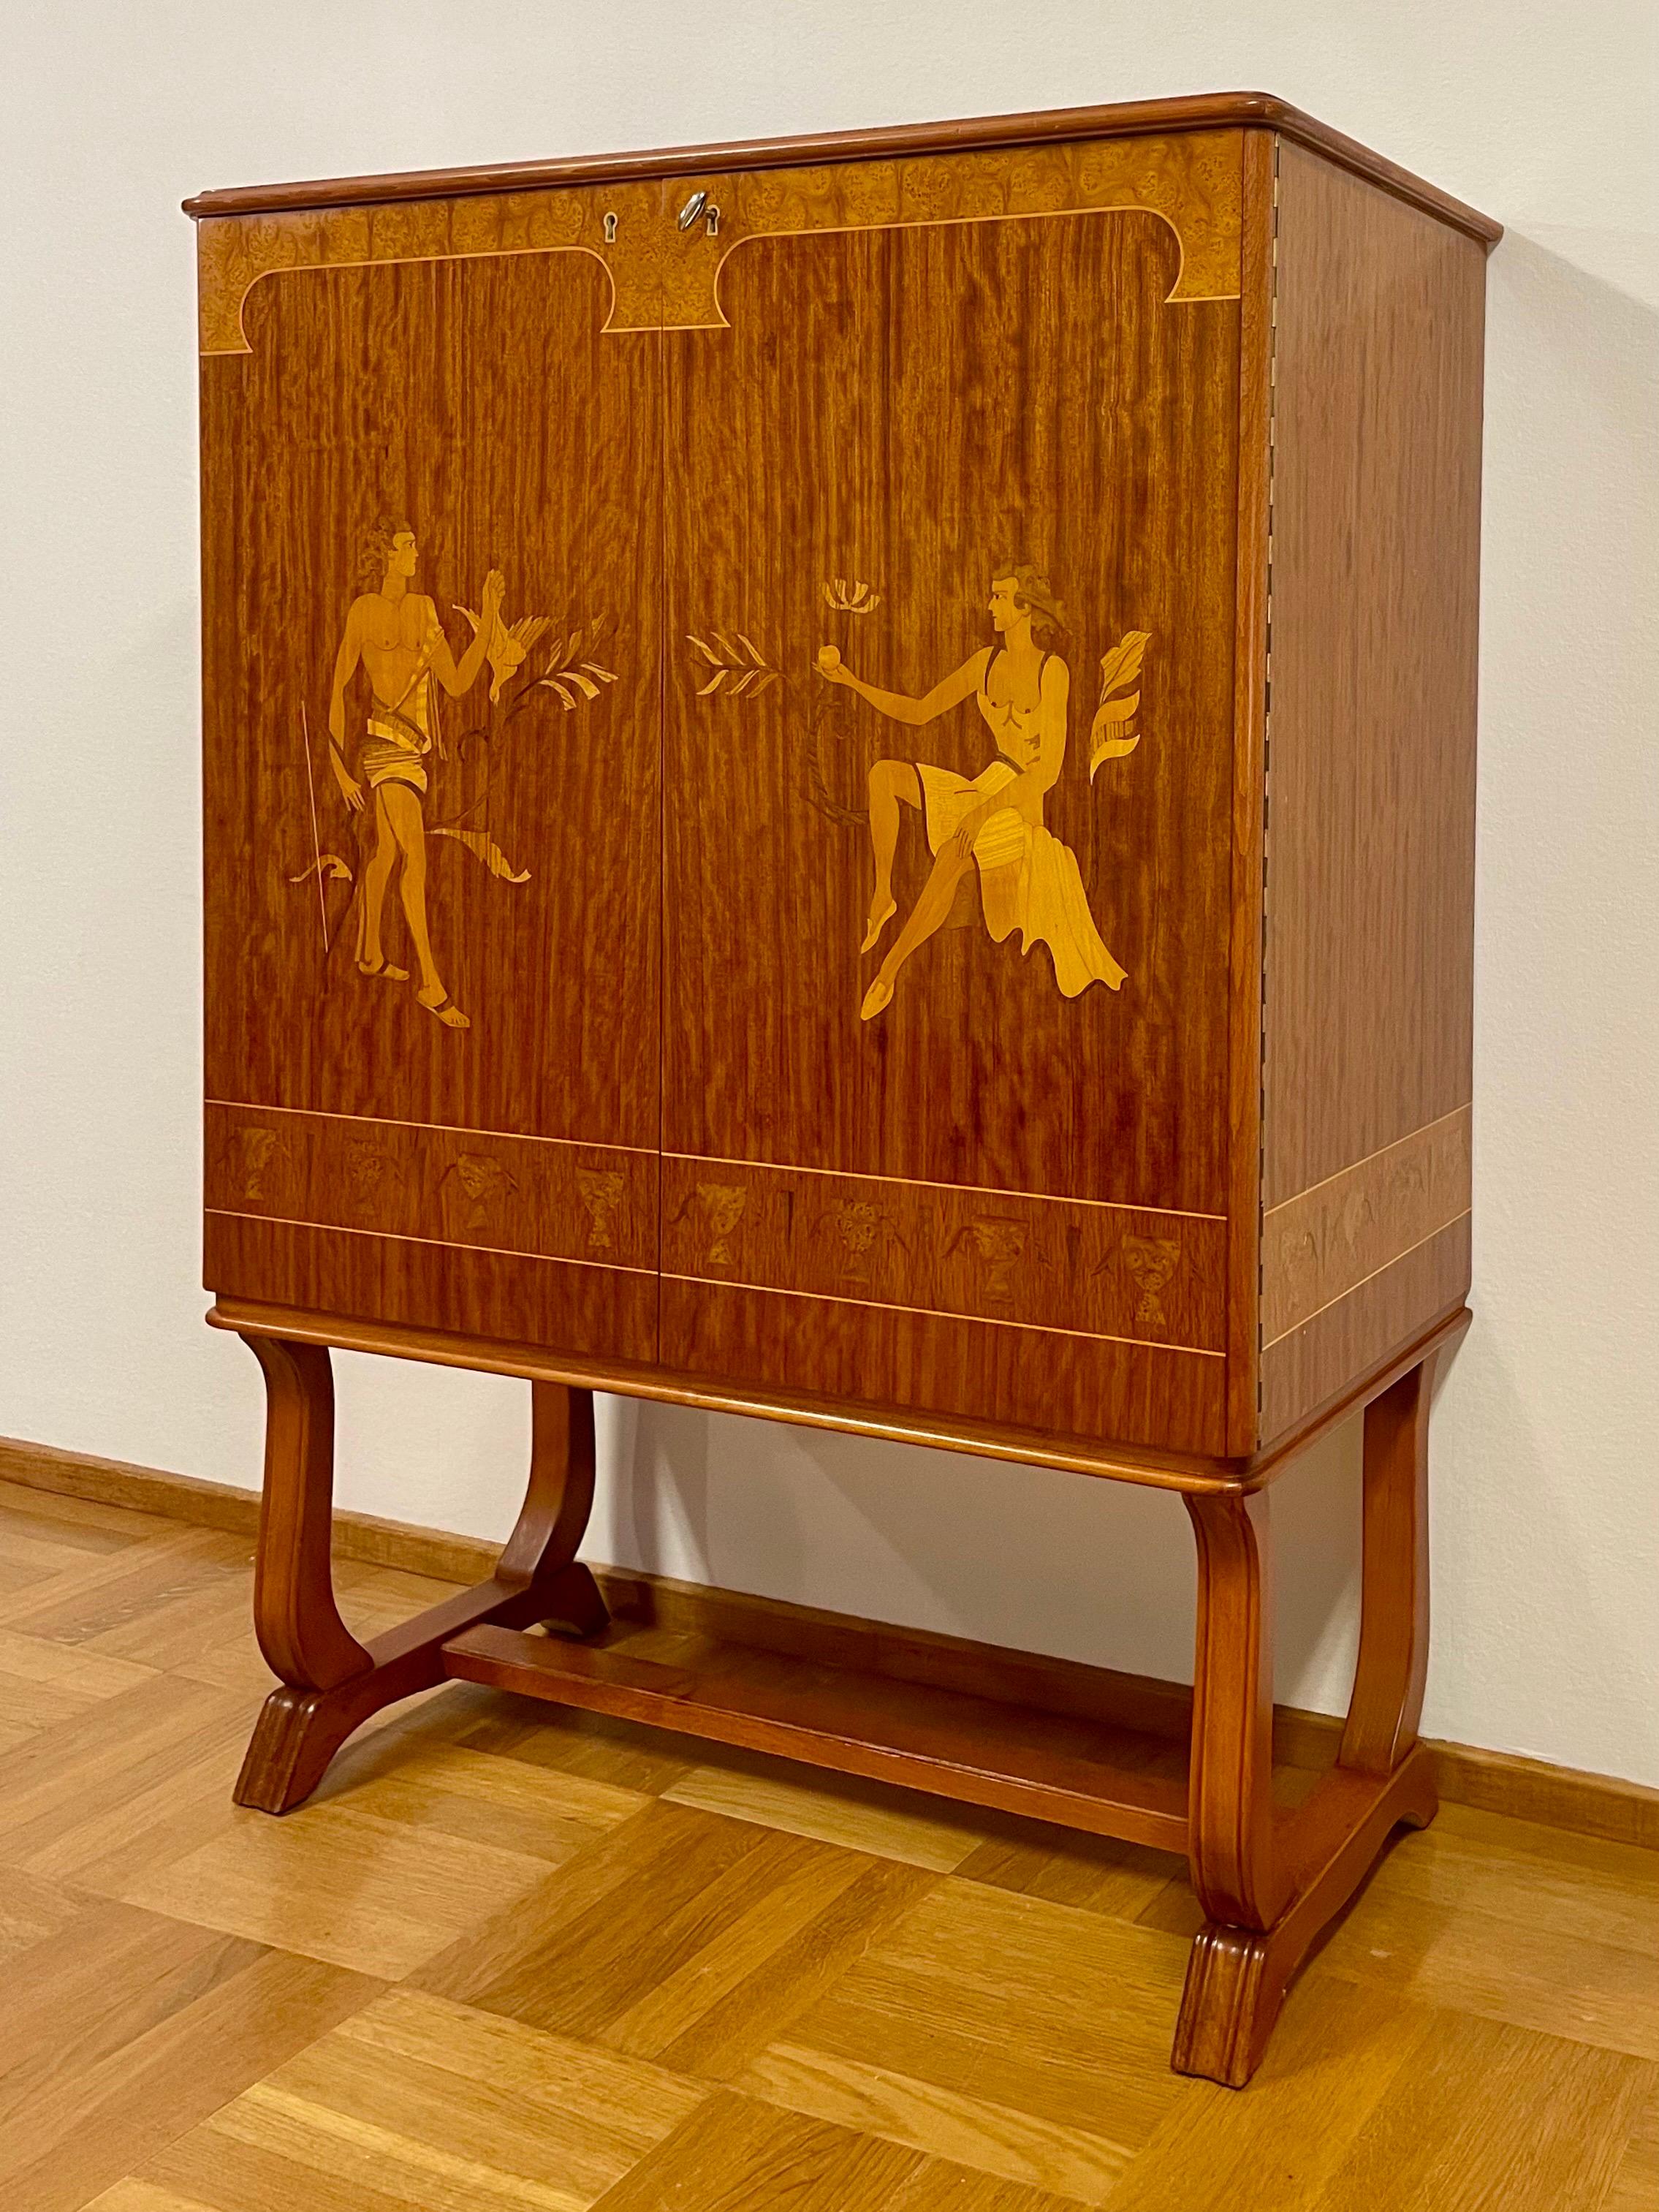 This is the Swedish Modern 1930s Cabinet with Mjölby Intarsia-decor from Vingåkers Möbelfabrik. 
It comes in very good condition, made of birch. Veneered with mahogany and decorated with inlays from Mjölby Intarsia.
Legs in stained birch. 

Behind